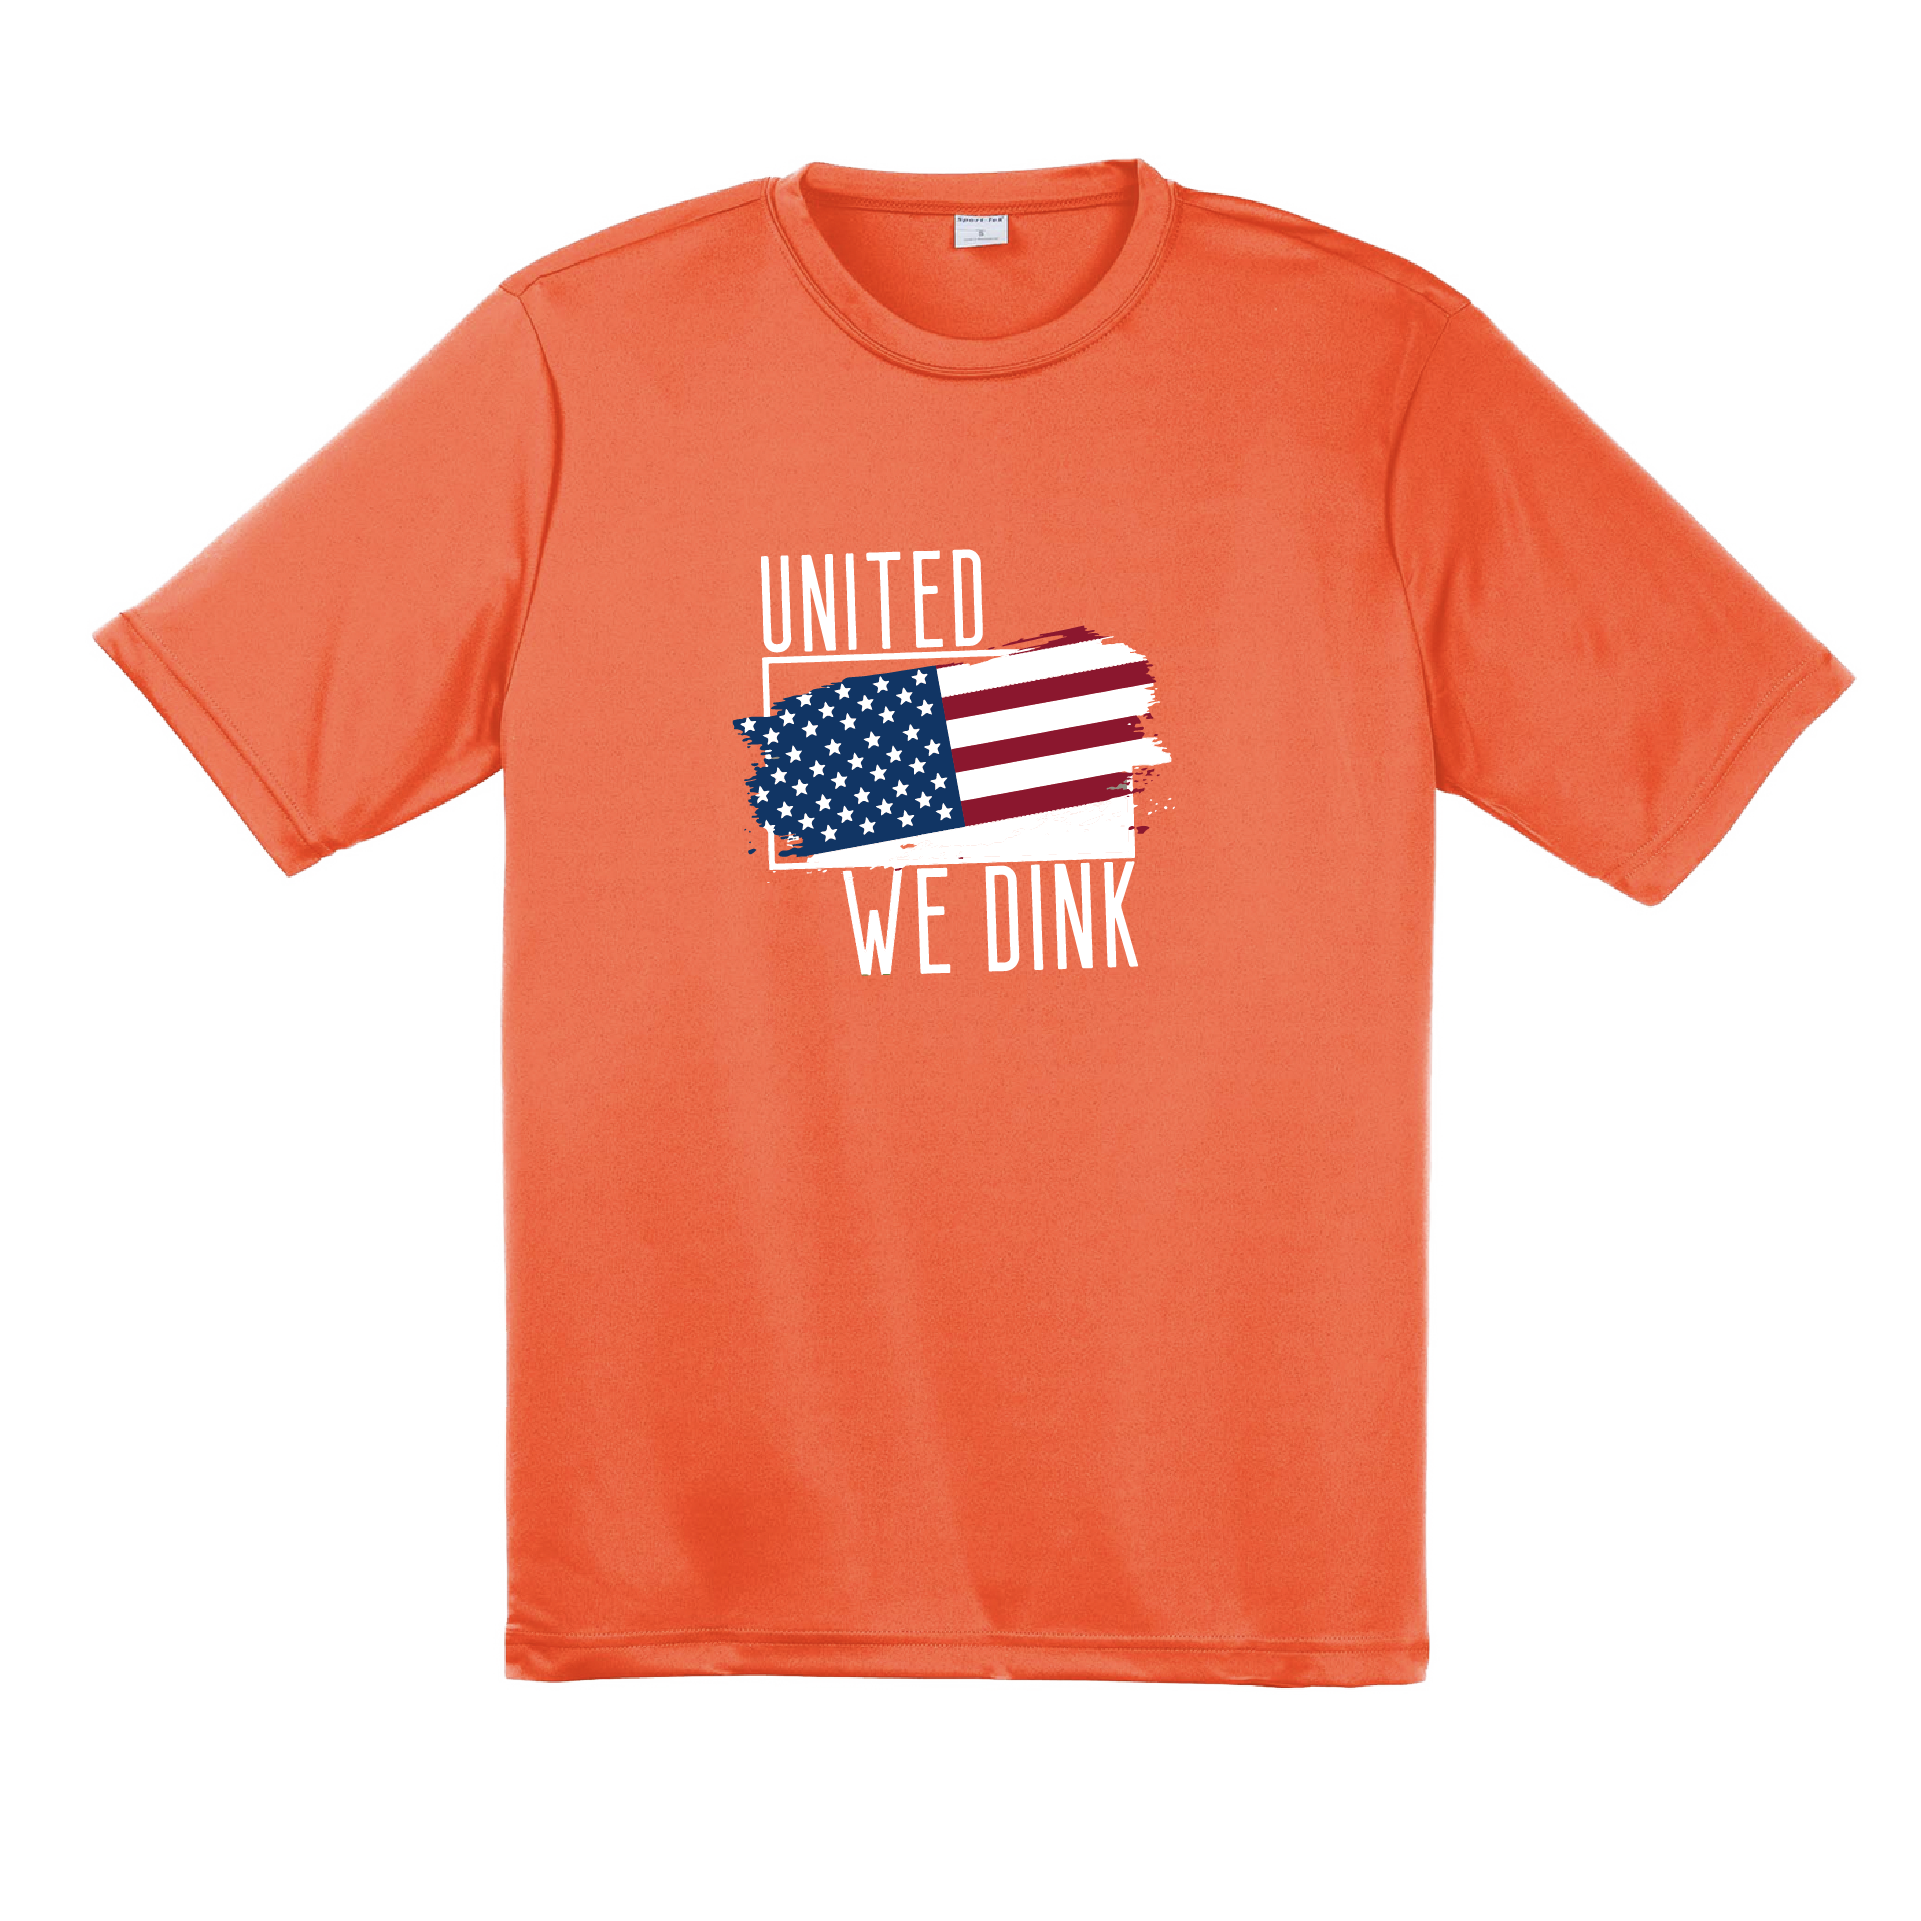 Pickleball Design: United We Dink.   Men's Styles: Short-Sleeve  Shirts are lightweight, roomy and highly breathable. These moisture-wicking shirts are designed for athletic performance. They feature PosiCharge technology to lock in color and prevent logos from fading. Removable tag and set-in sleeves for comfort.